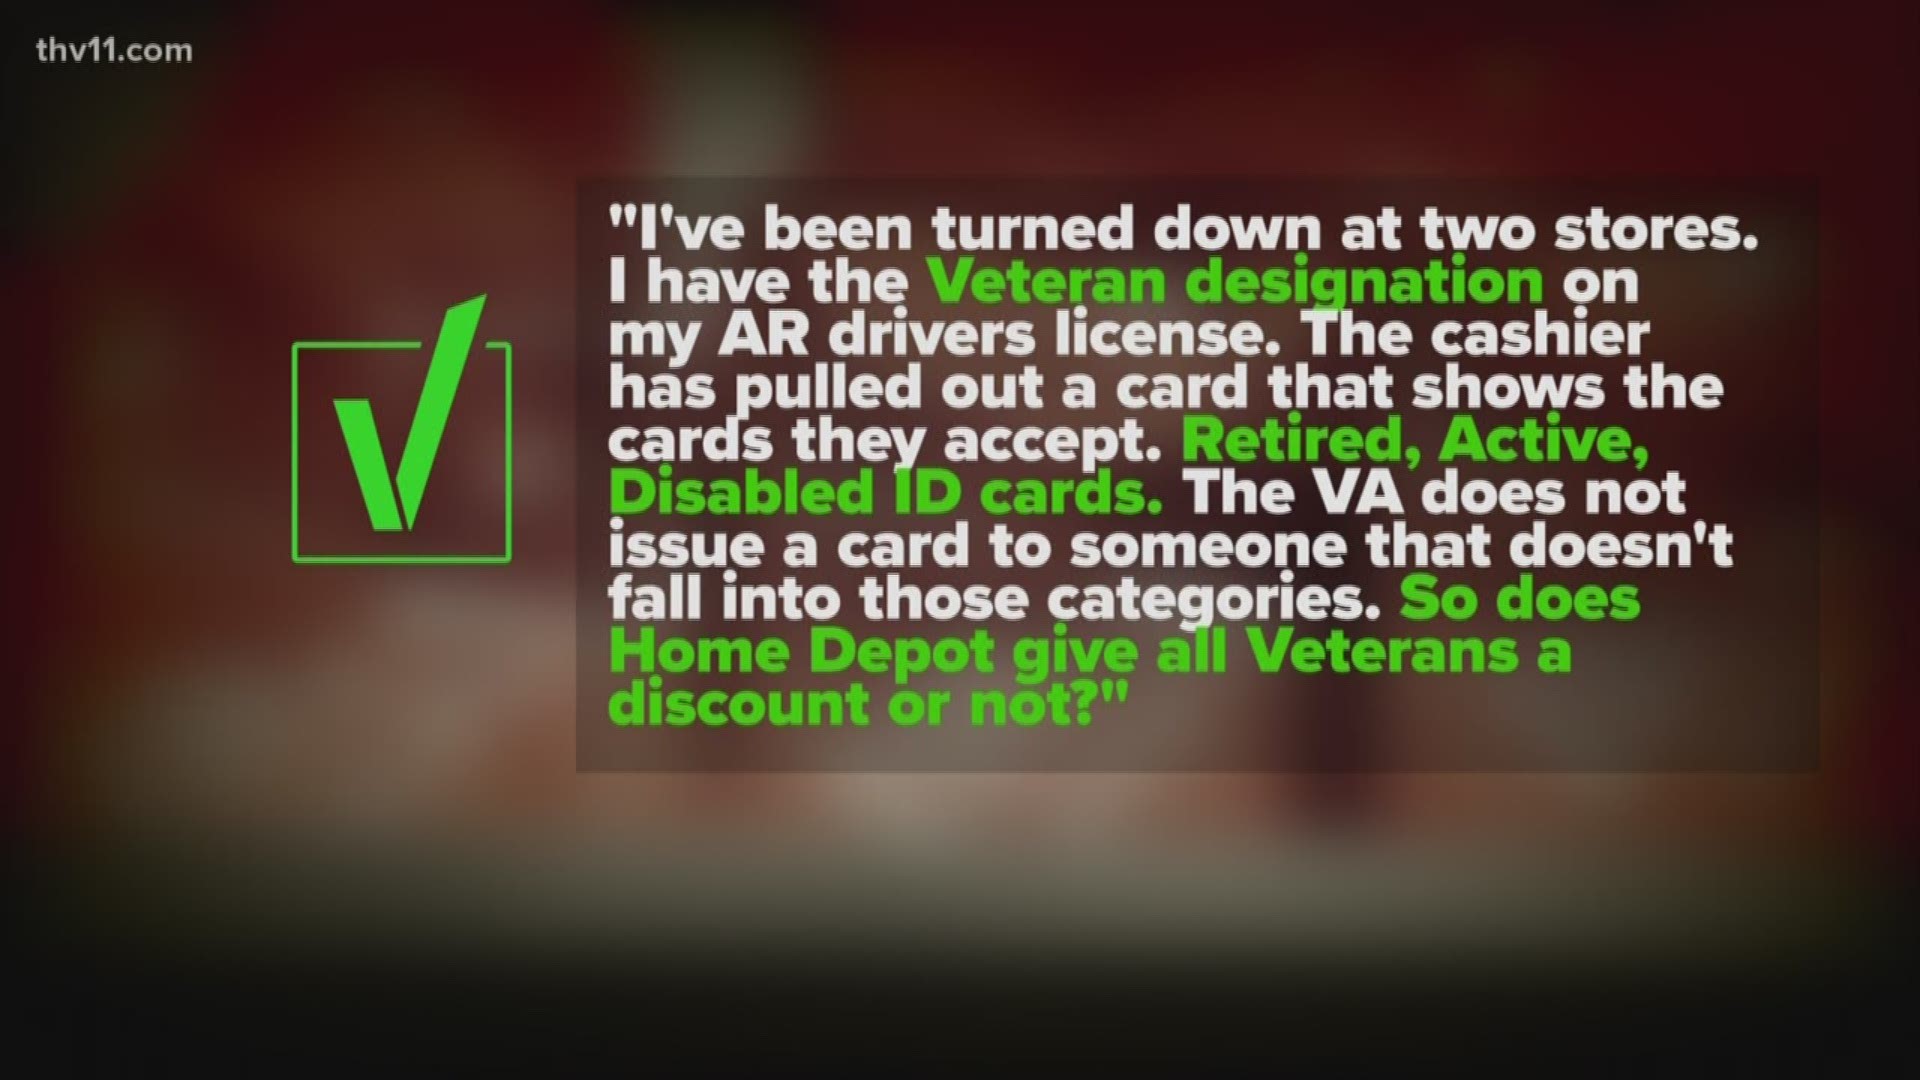 THV11 is committed to saluting our heroes by placing attention on veterans' issues. One veteran's question prompted us to reach out to a major retailer for answers.